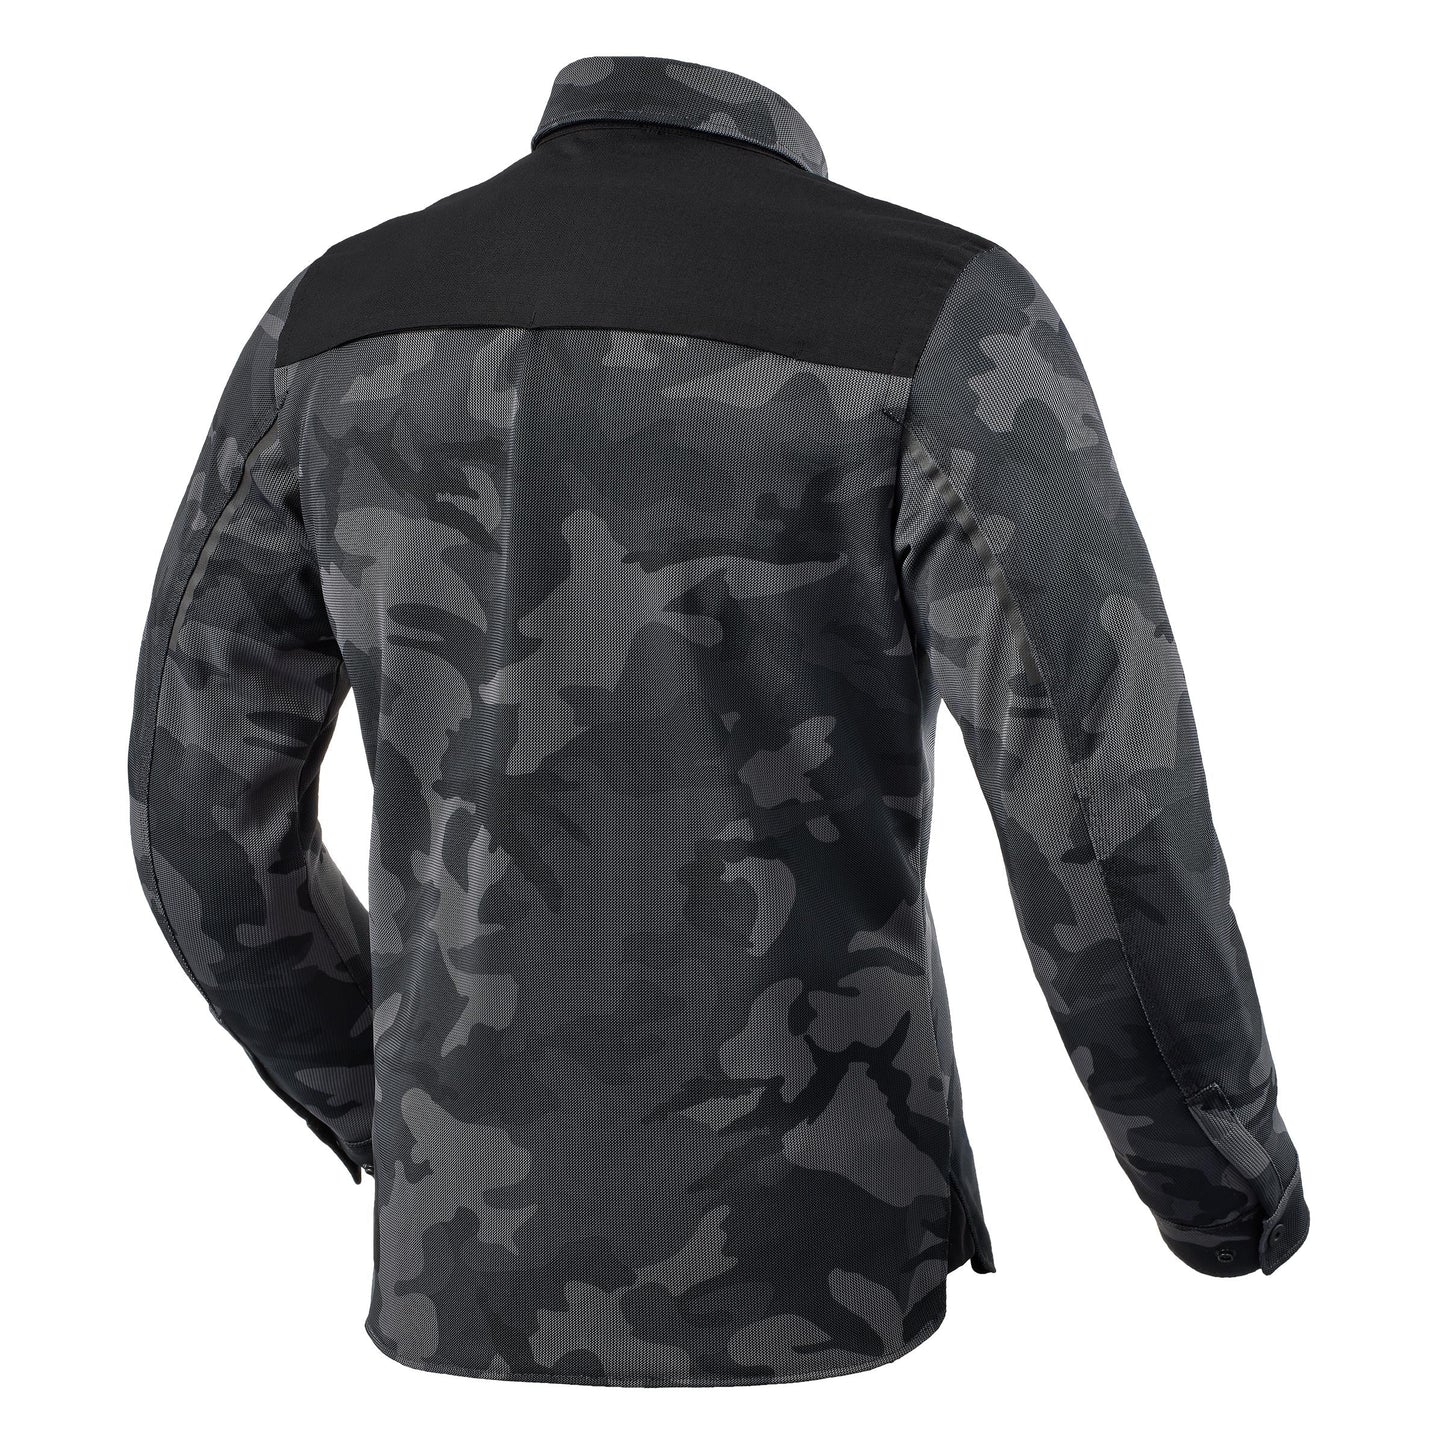 REV'IT! Tracer Air 2 Overshirt